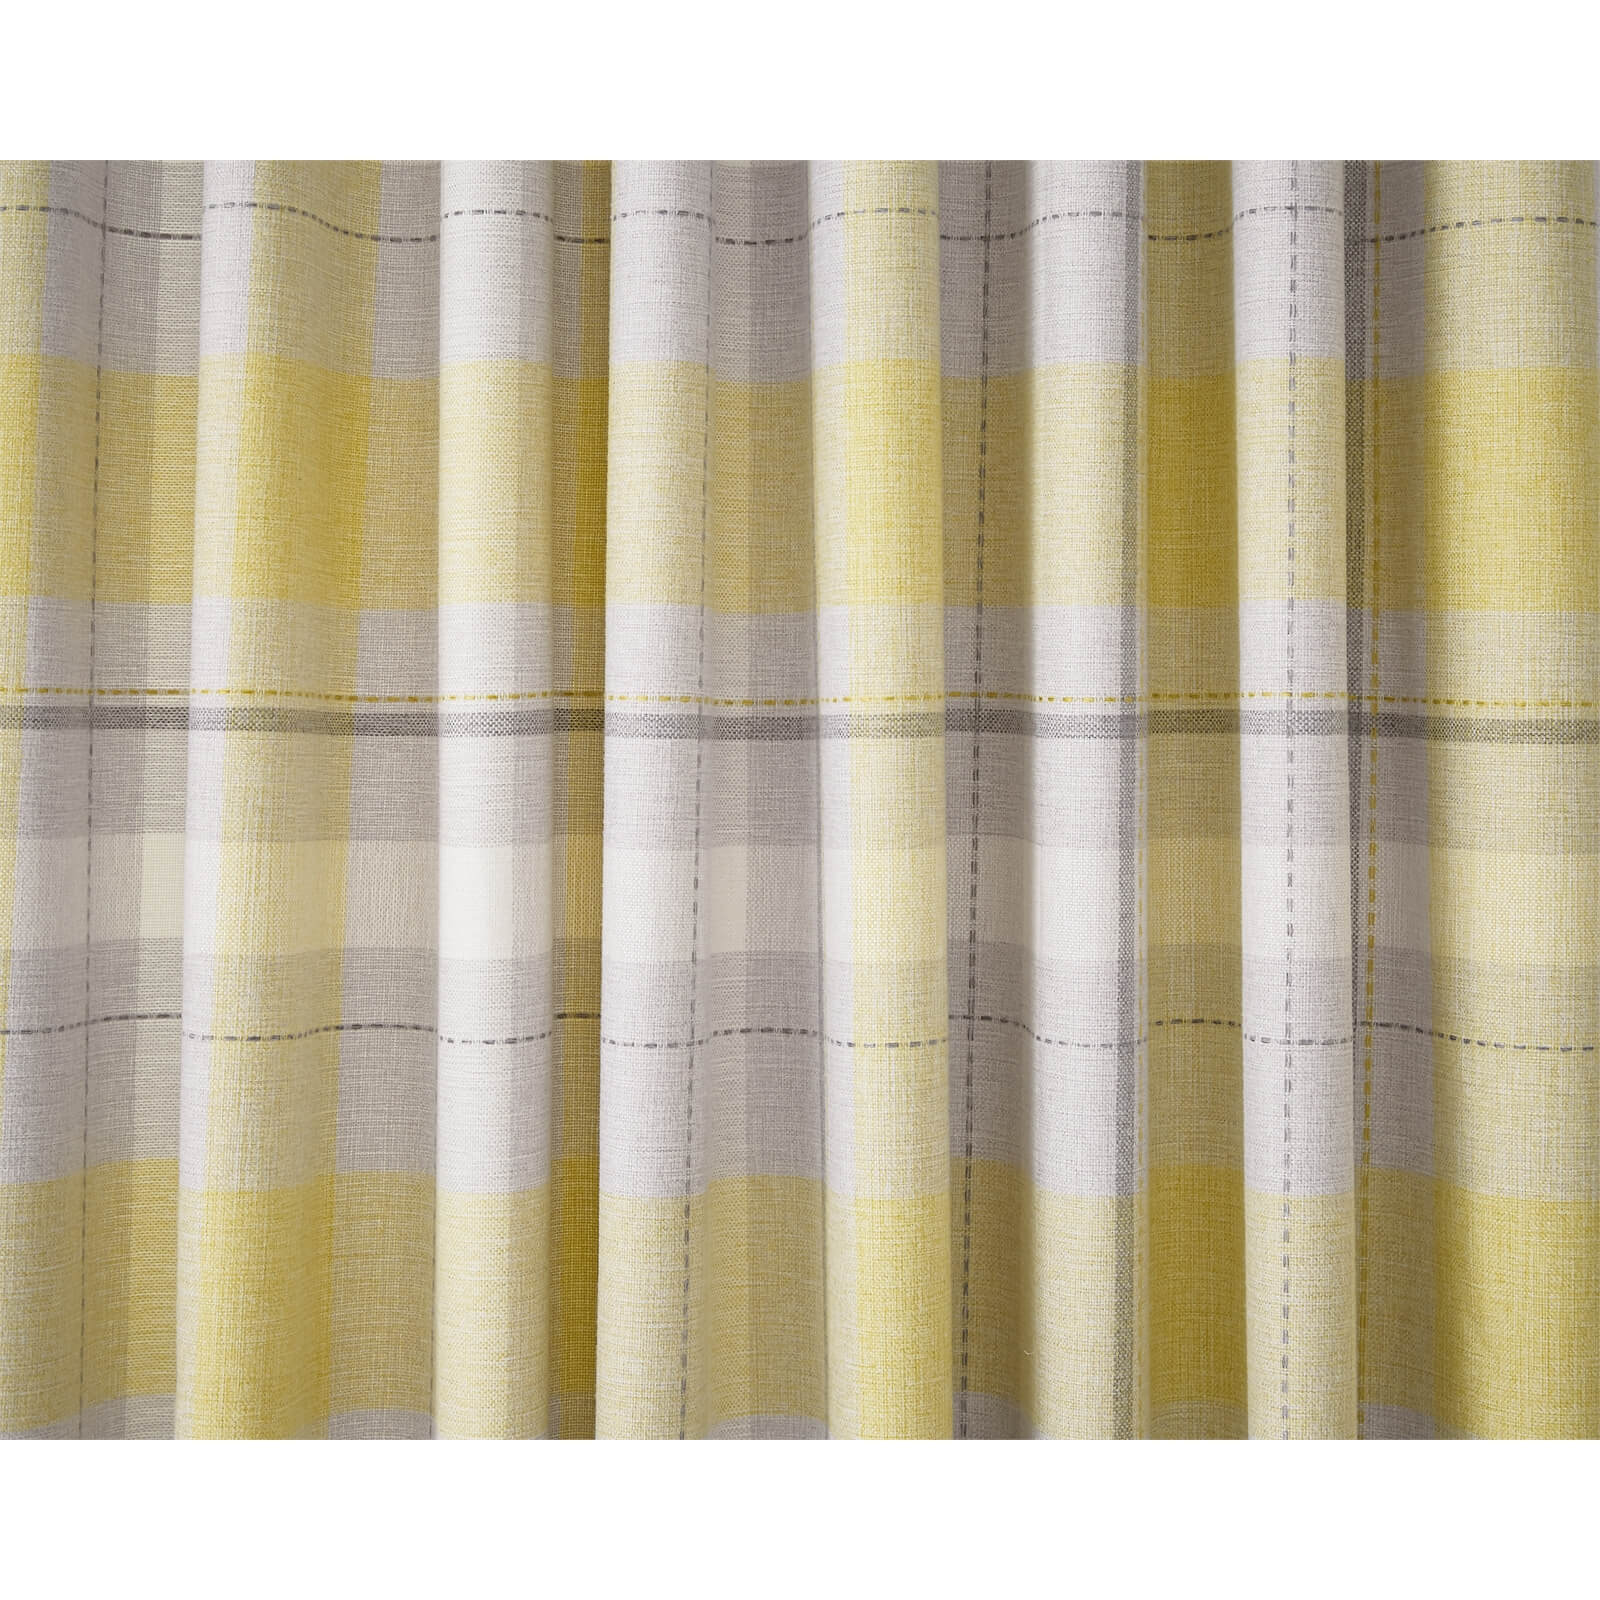 Helena Springfield Nora Lined Curtains 66 x 72 - Chartreuse